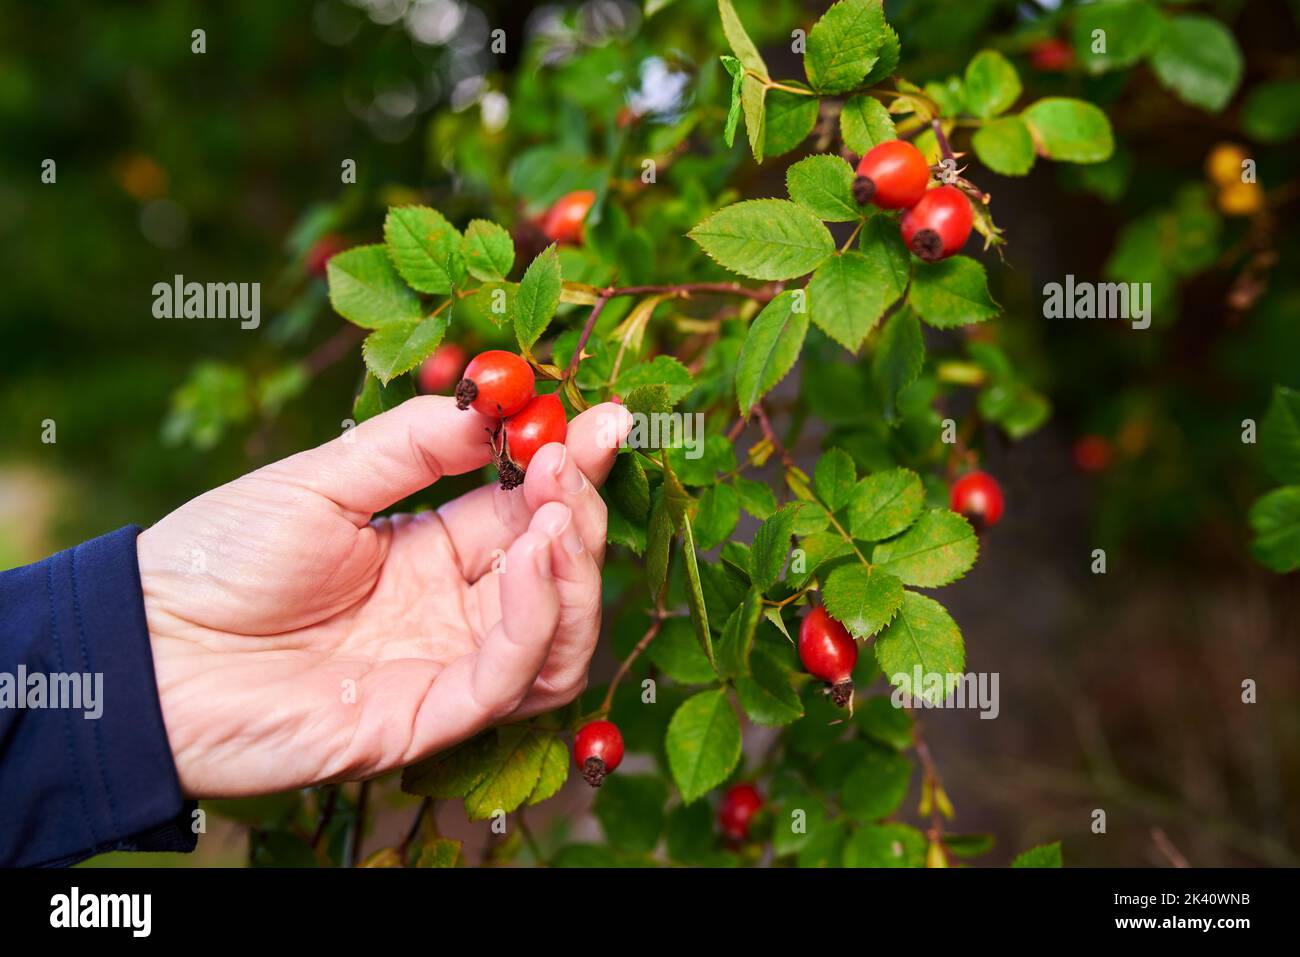 A woman's hand harvests red rose hips from a bush with green leaves on an autumn day. Close-up photo with a blurred background. Stock Photo